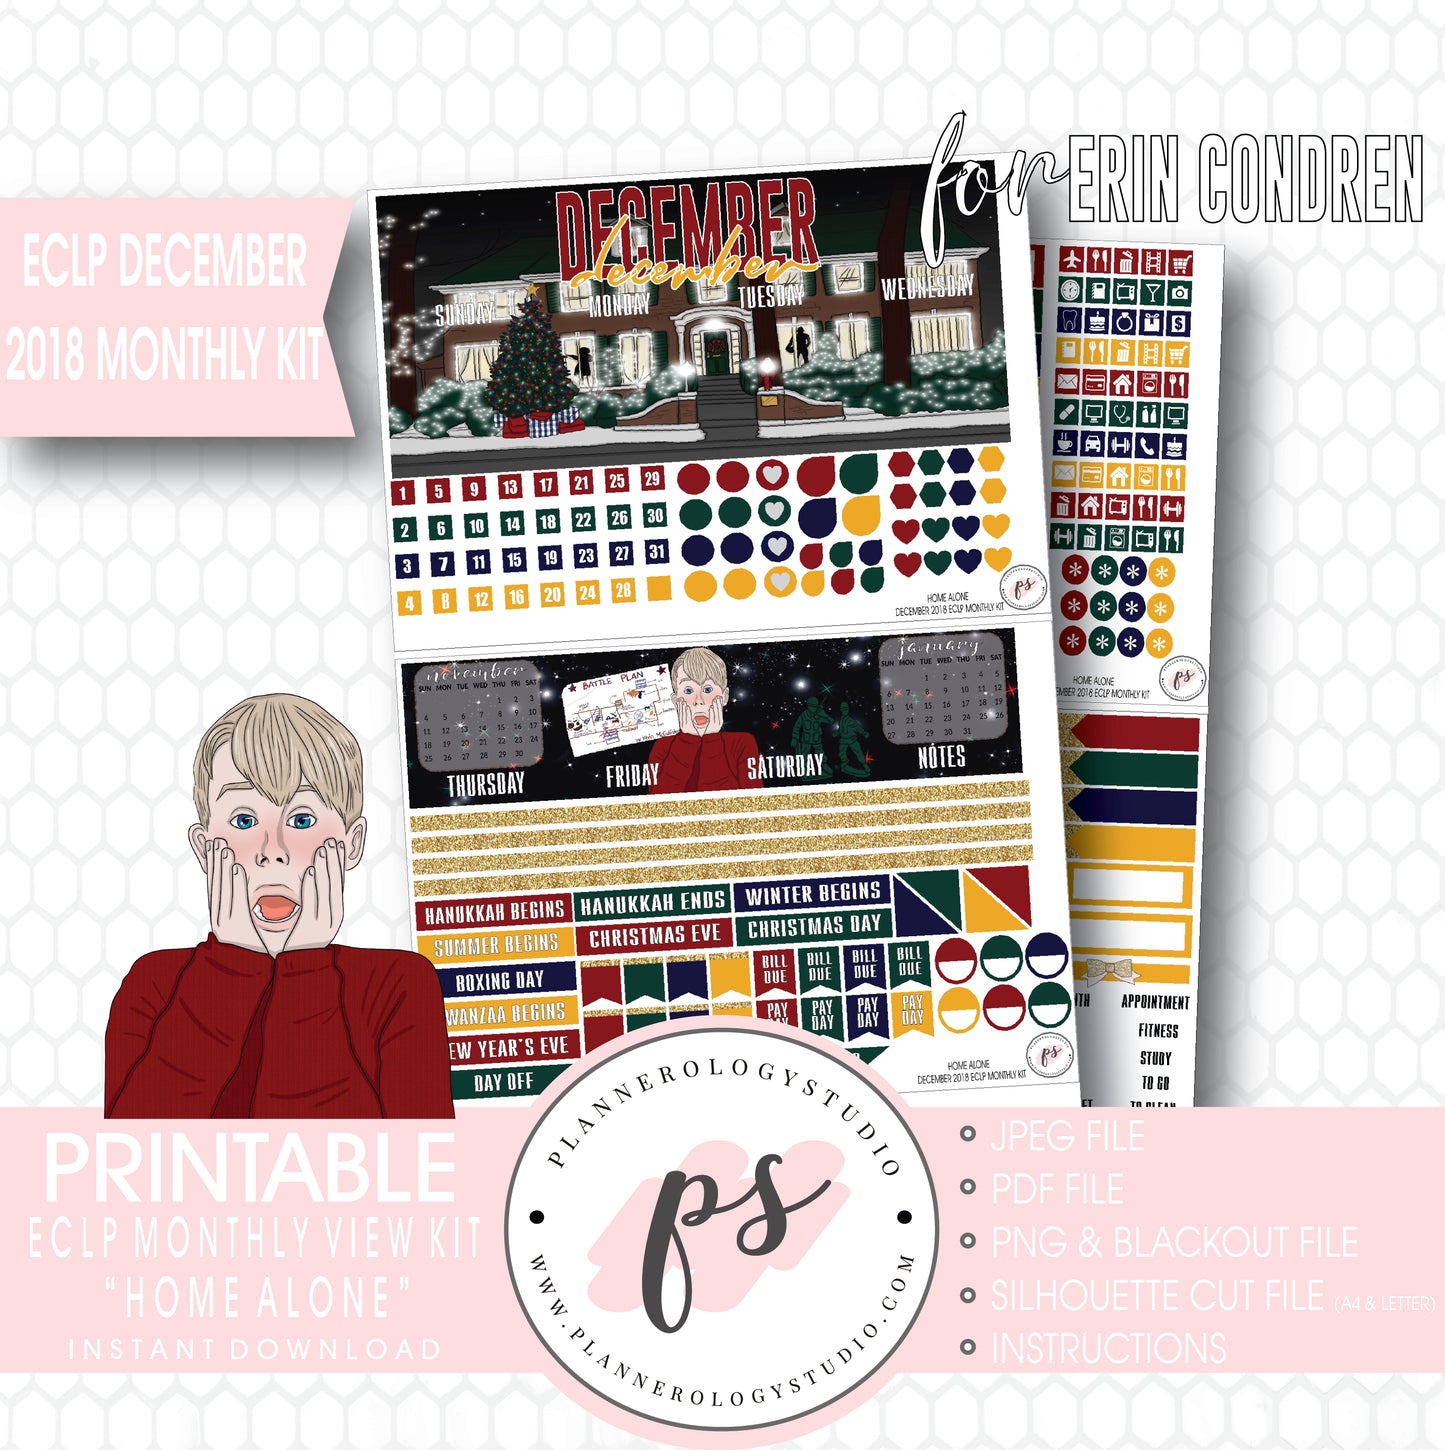 Home Alone Christmas December 2018 Monthly View Kit Digital Printable Planner Stickers (for use with Erin Condren) - Plannerologystudio